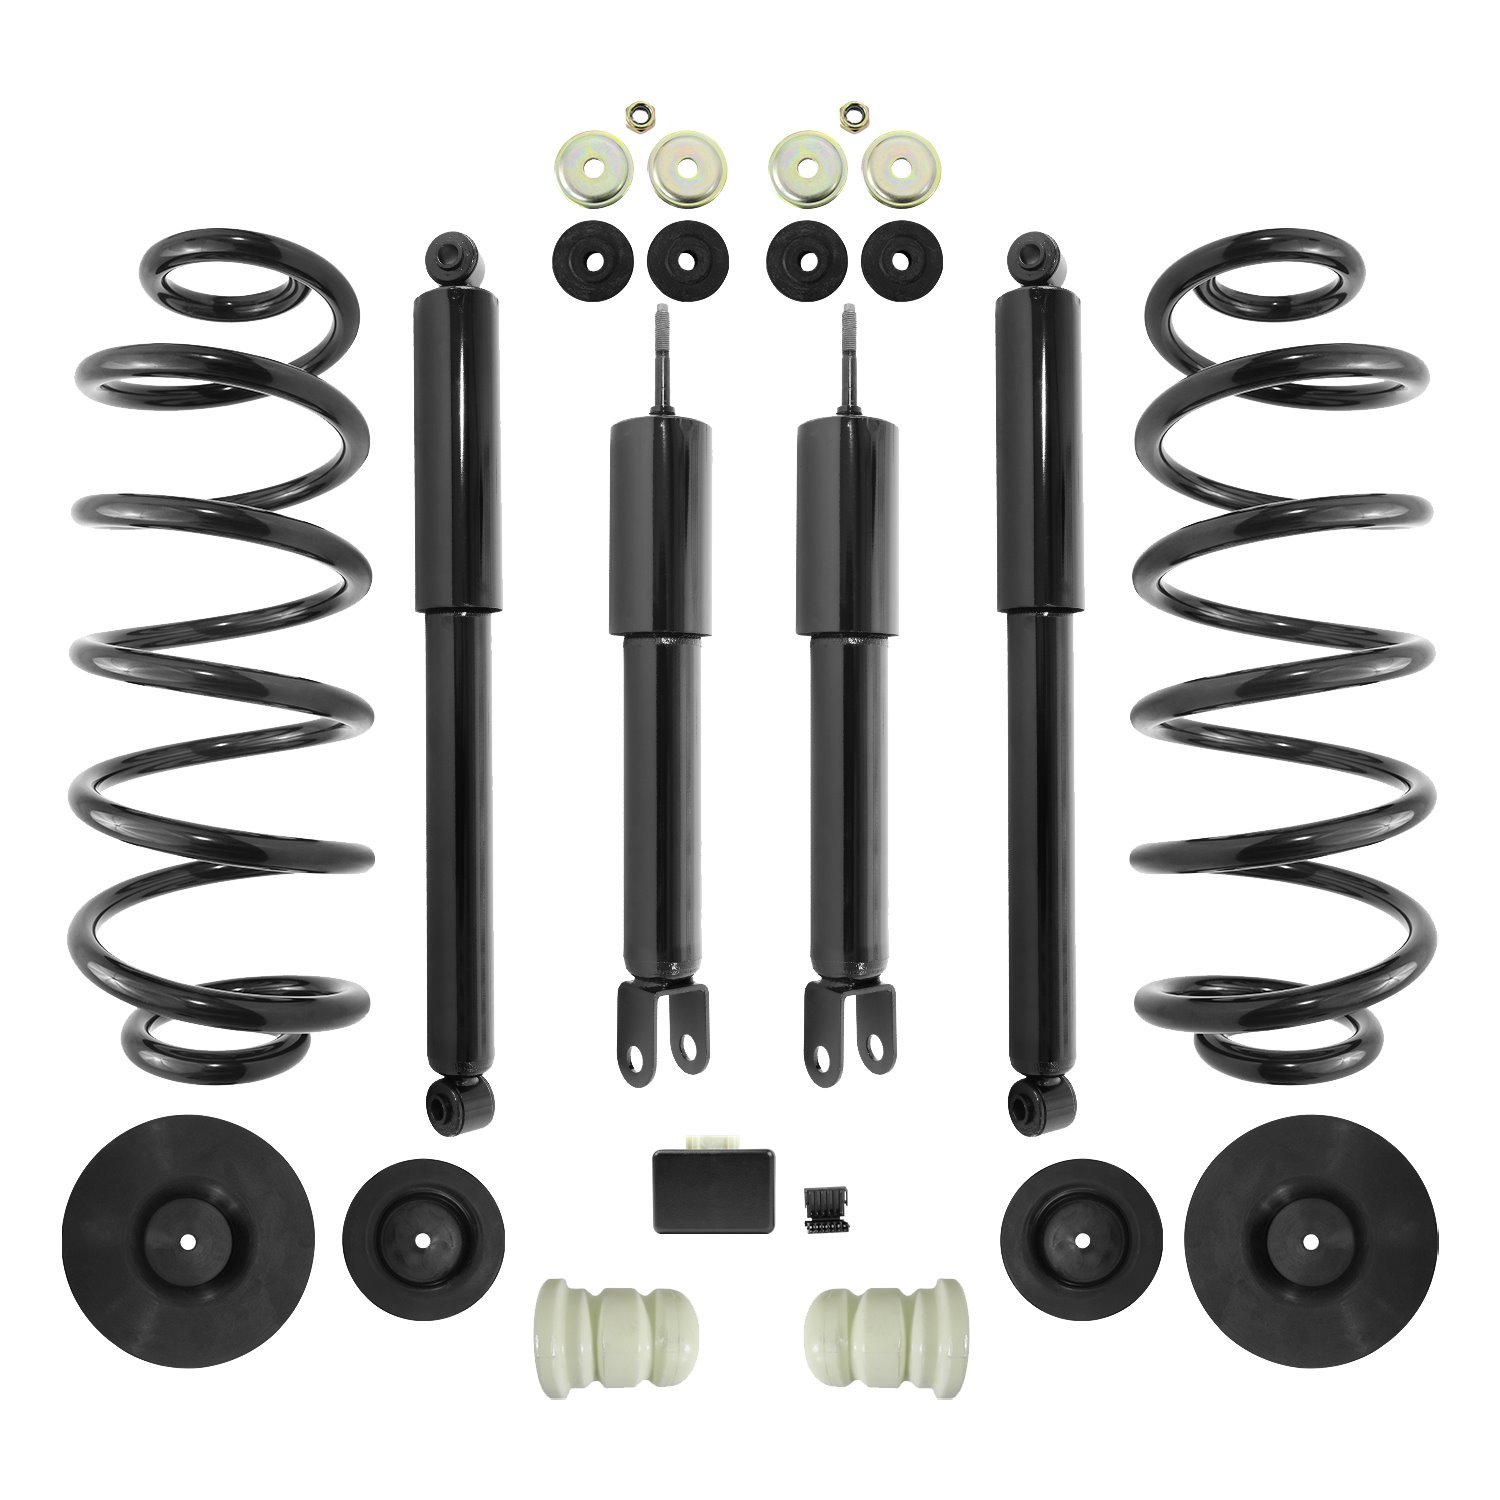 4-30-015000-S Active To Passive Suspension Conversion Kit Fits Select Cadillac Escalade, Chevy Tahoe, GMC Yukon